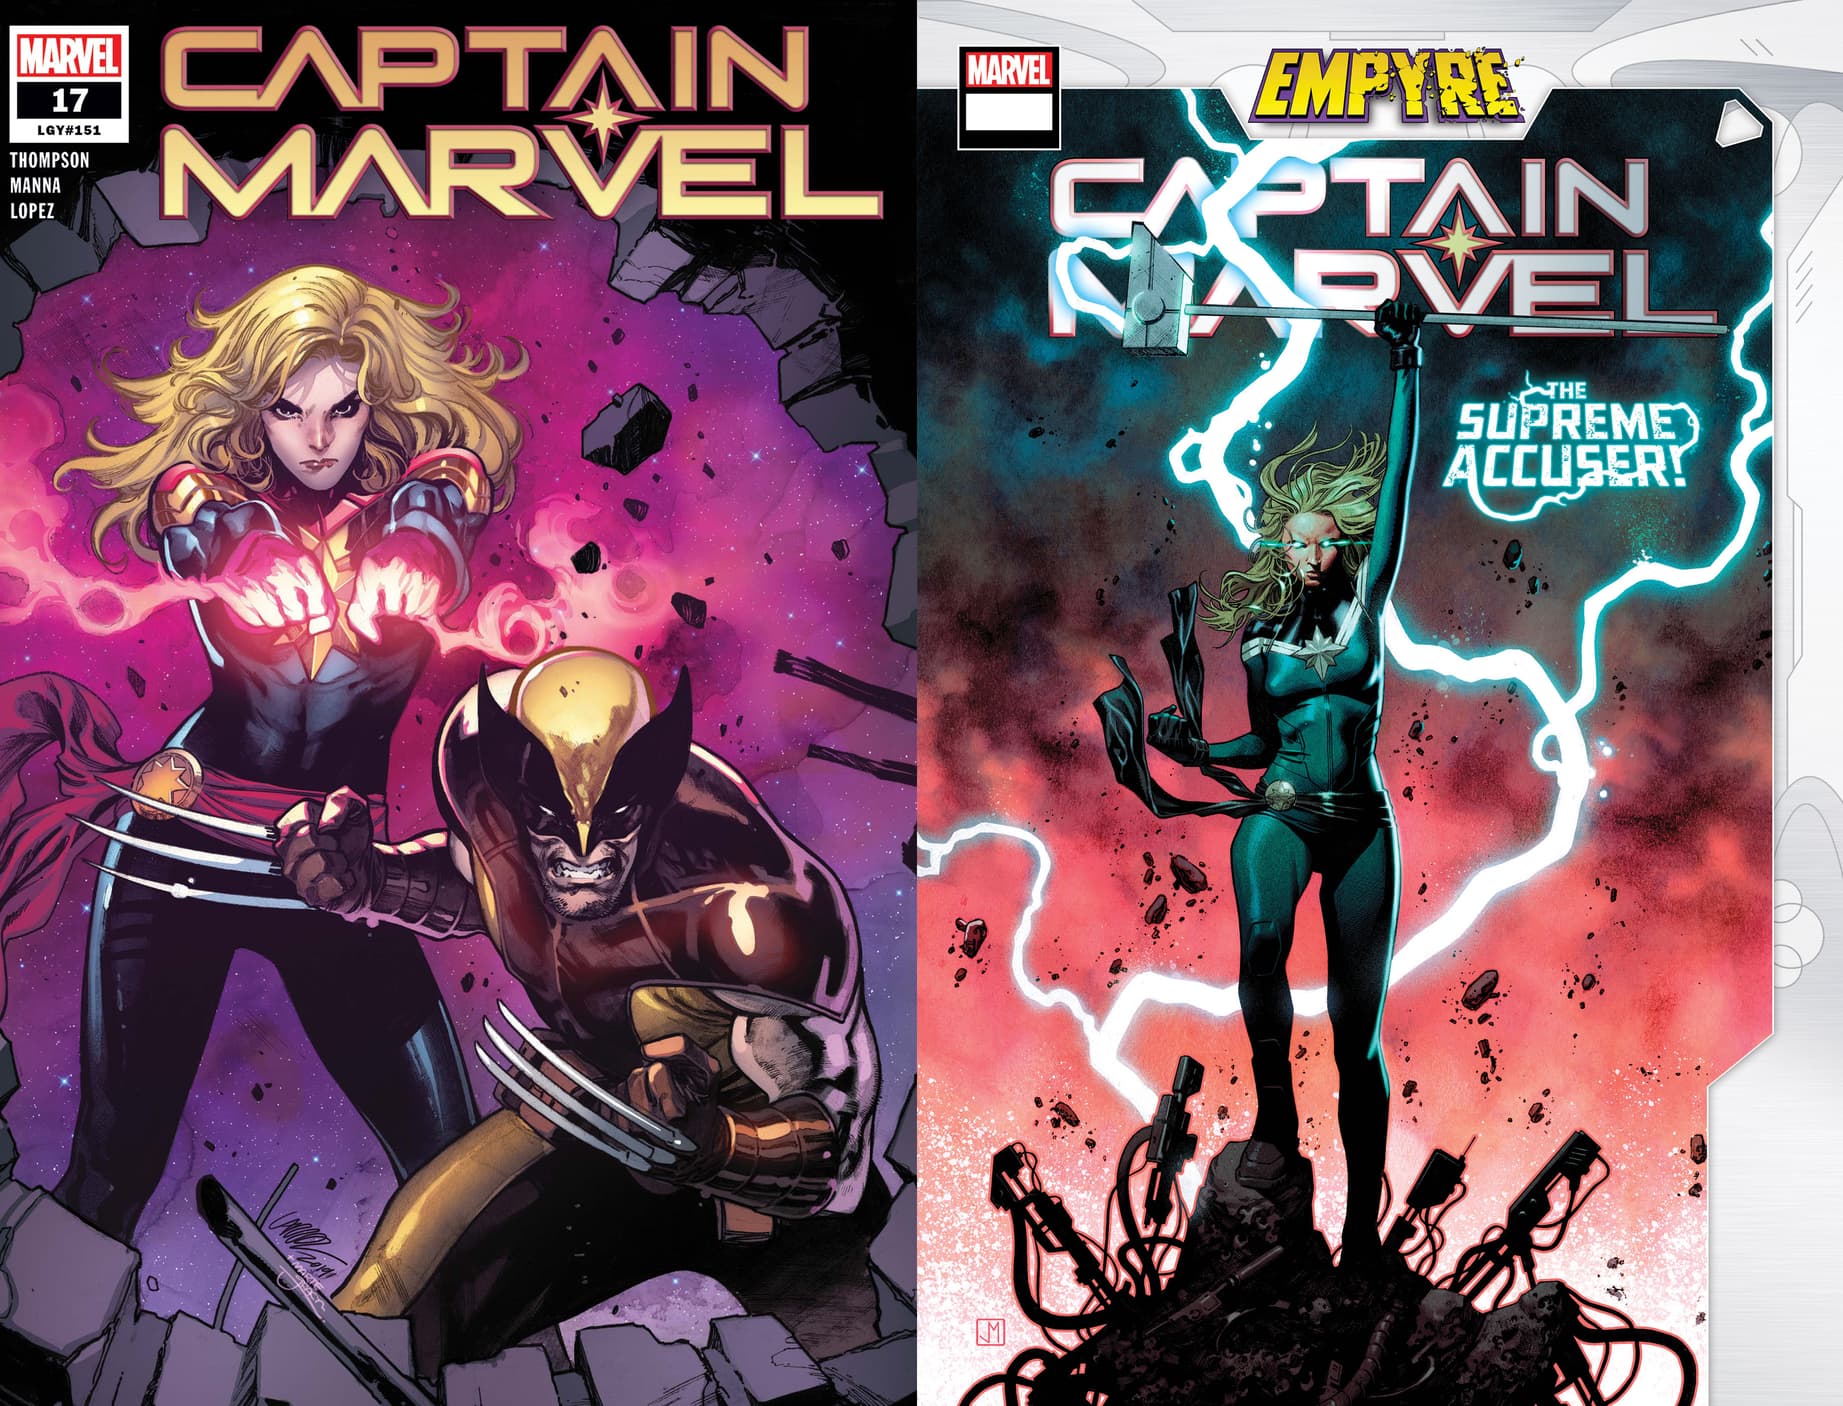 Captain Marvel #17 and #18